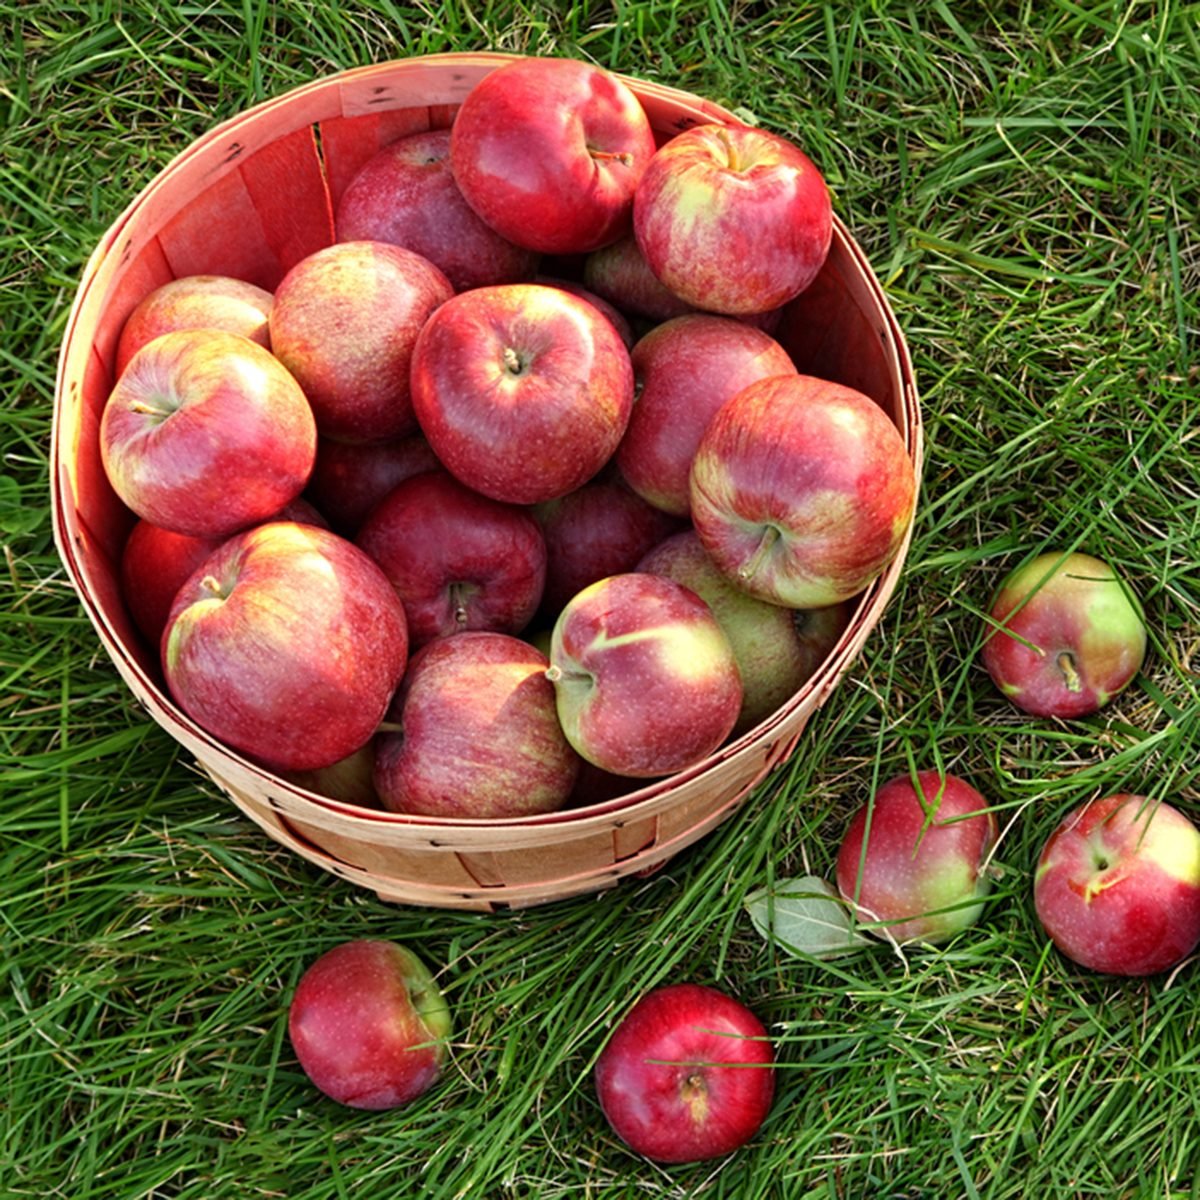 https://www.tasteofhome.com/wp-content/uploads/2018/08/Country-Apple-Orchard.jpg